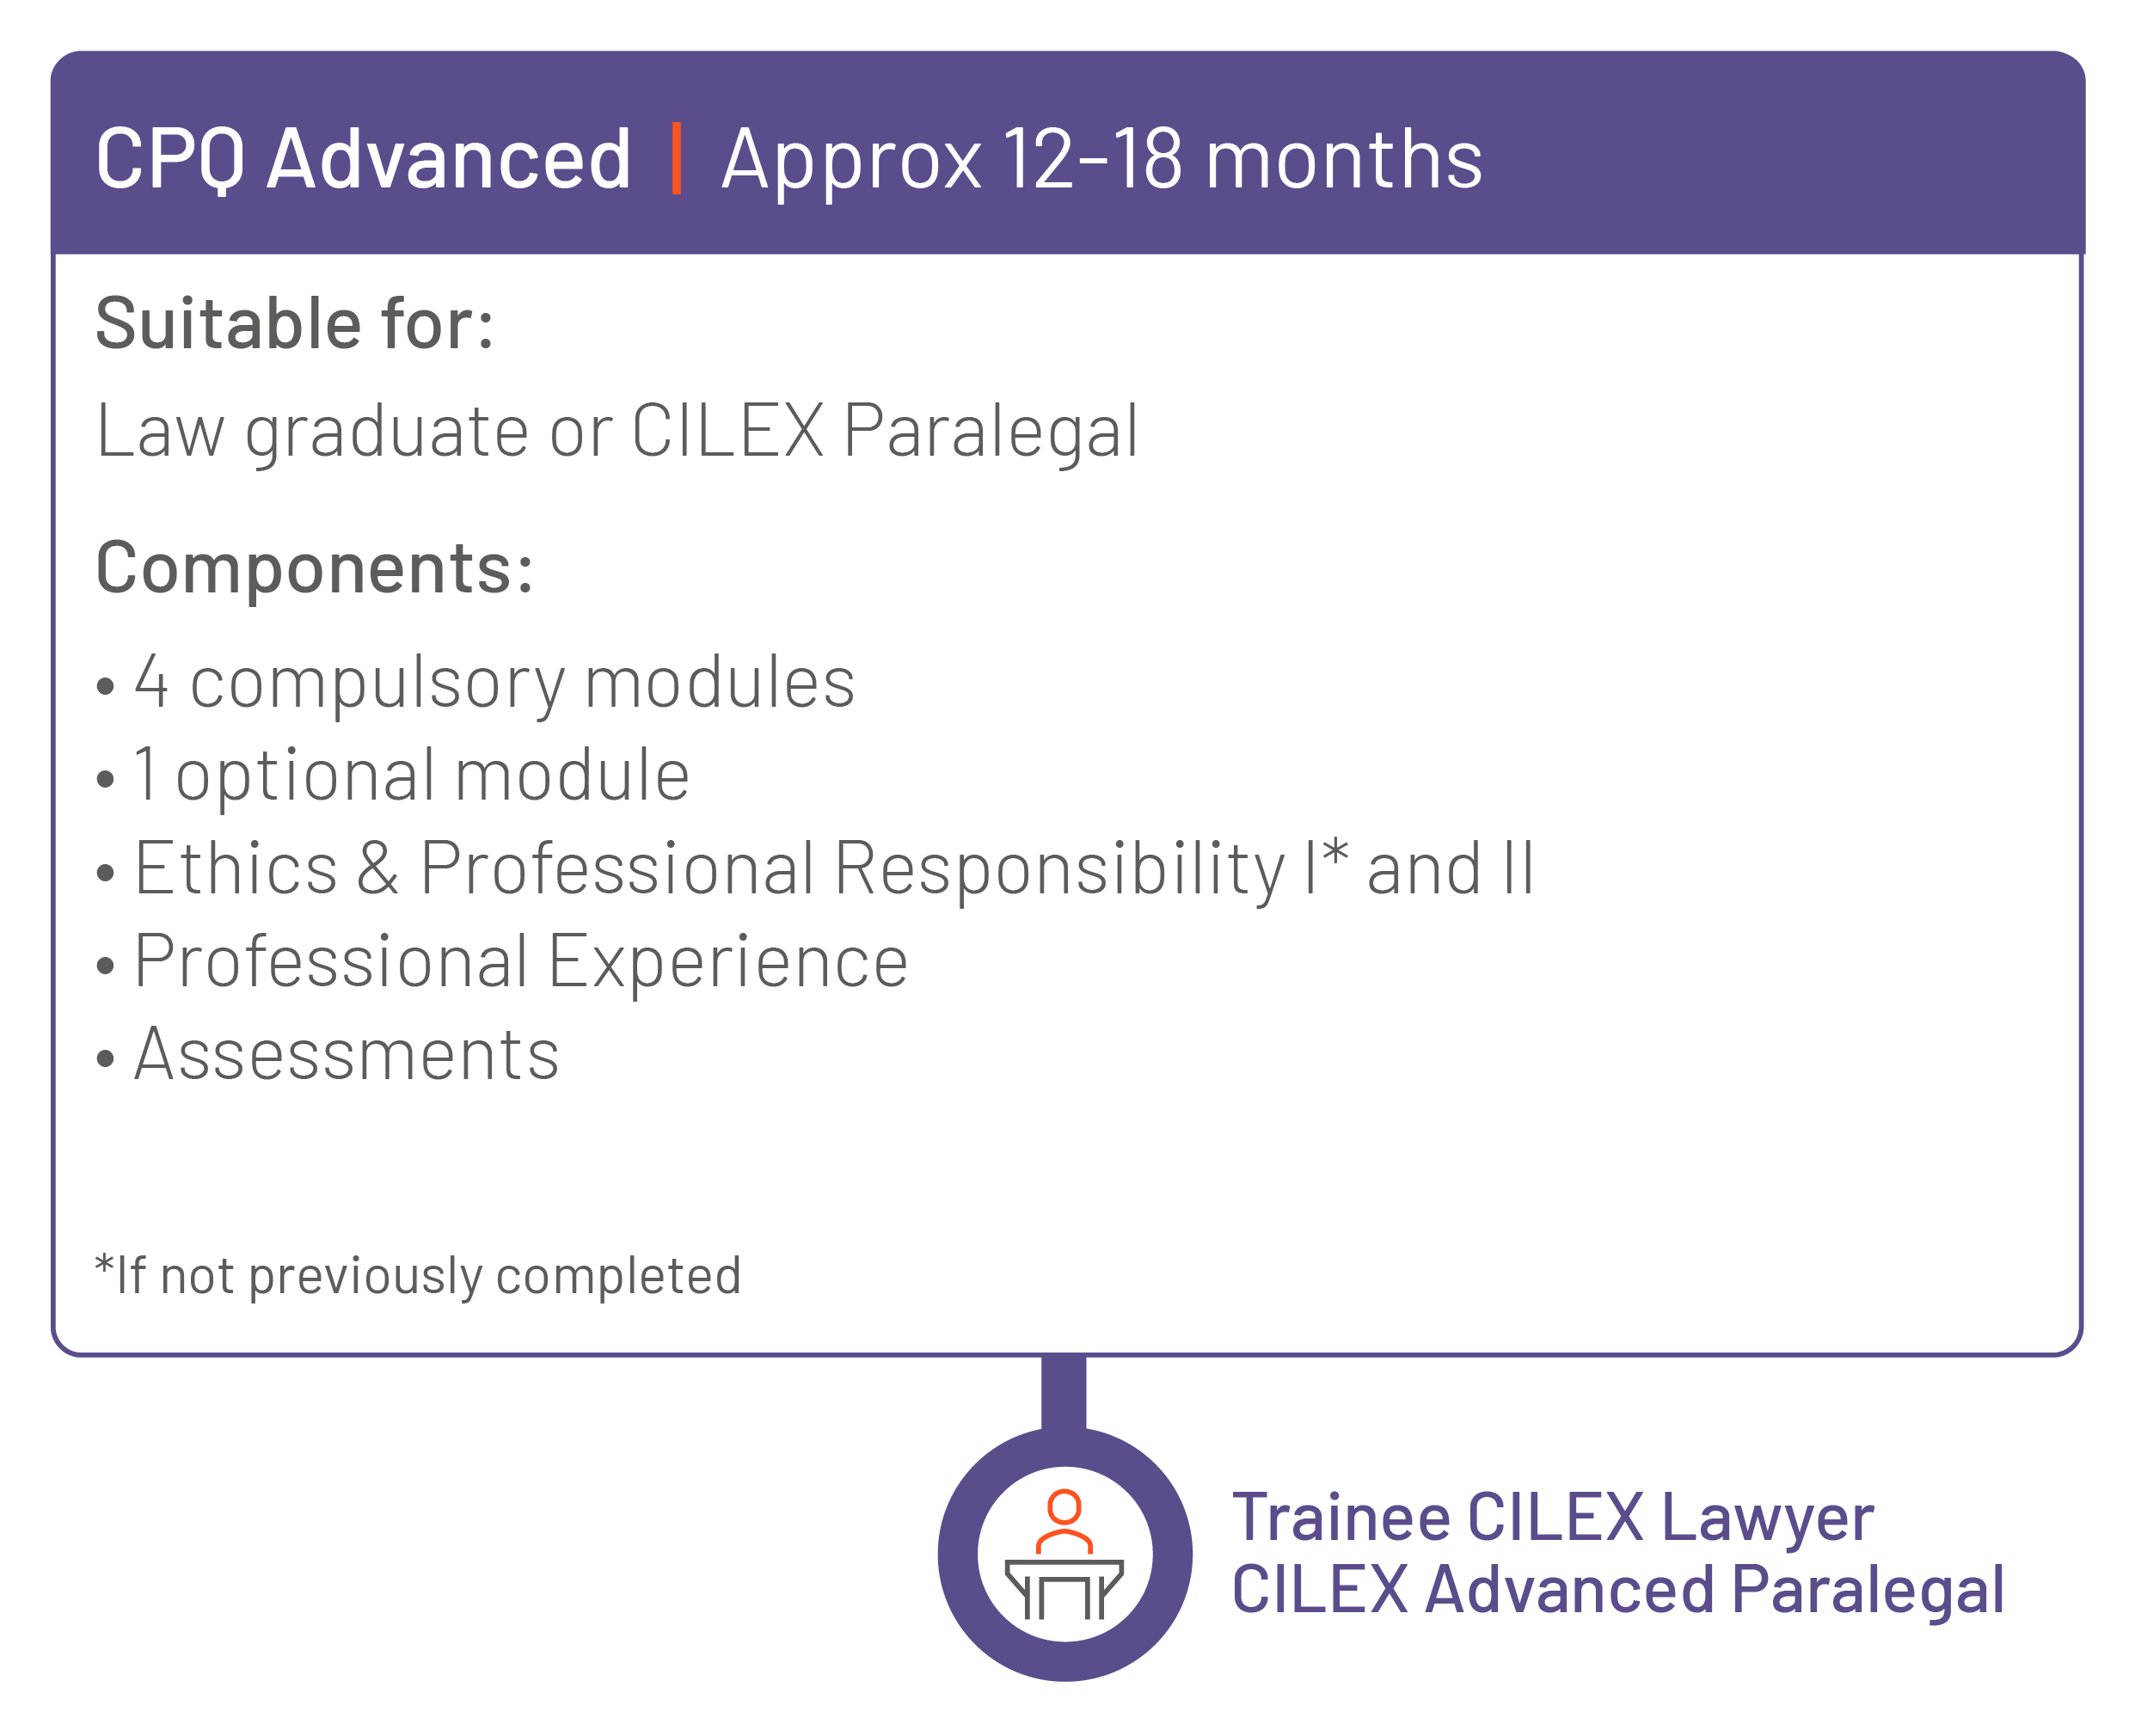 CPQ Advanced - Approx 12-18 months. Suitable for: Law graduate or CILEX Paralegal. Components: 4 compulsory modules, 1 optional module, Ethics & Professional Responsibility 1 and 2 (if not previously completed), Professional Experience, Assessments. Outcome: CILEX Trainee Lawyer, CILEX Advanced Paralegal.